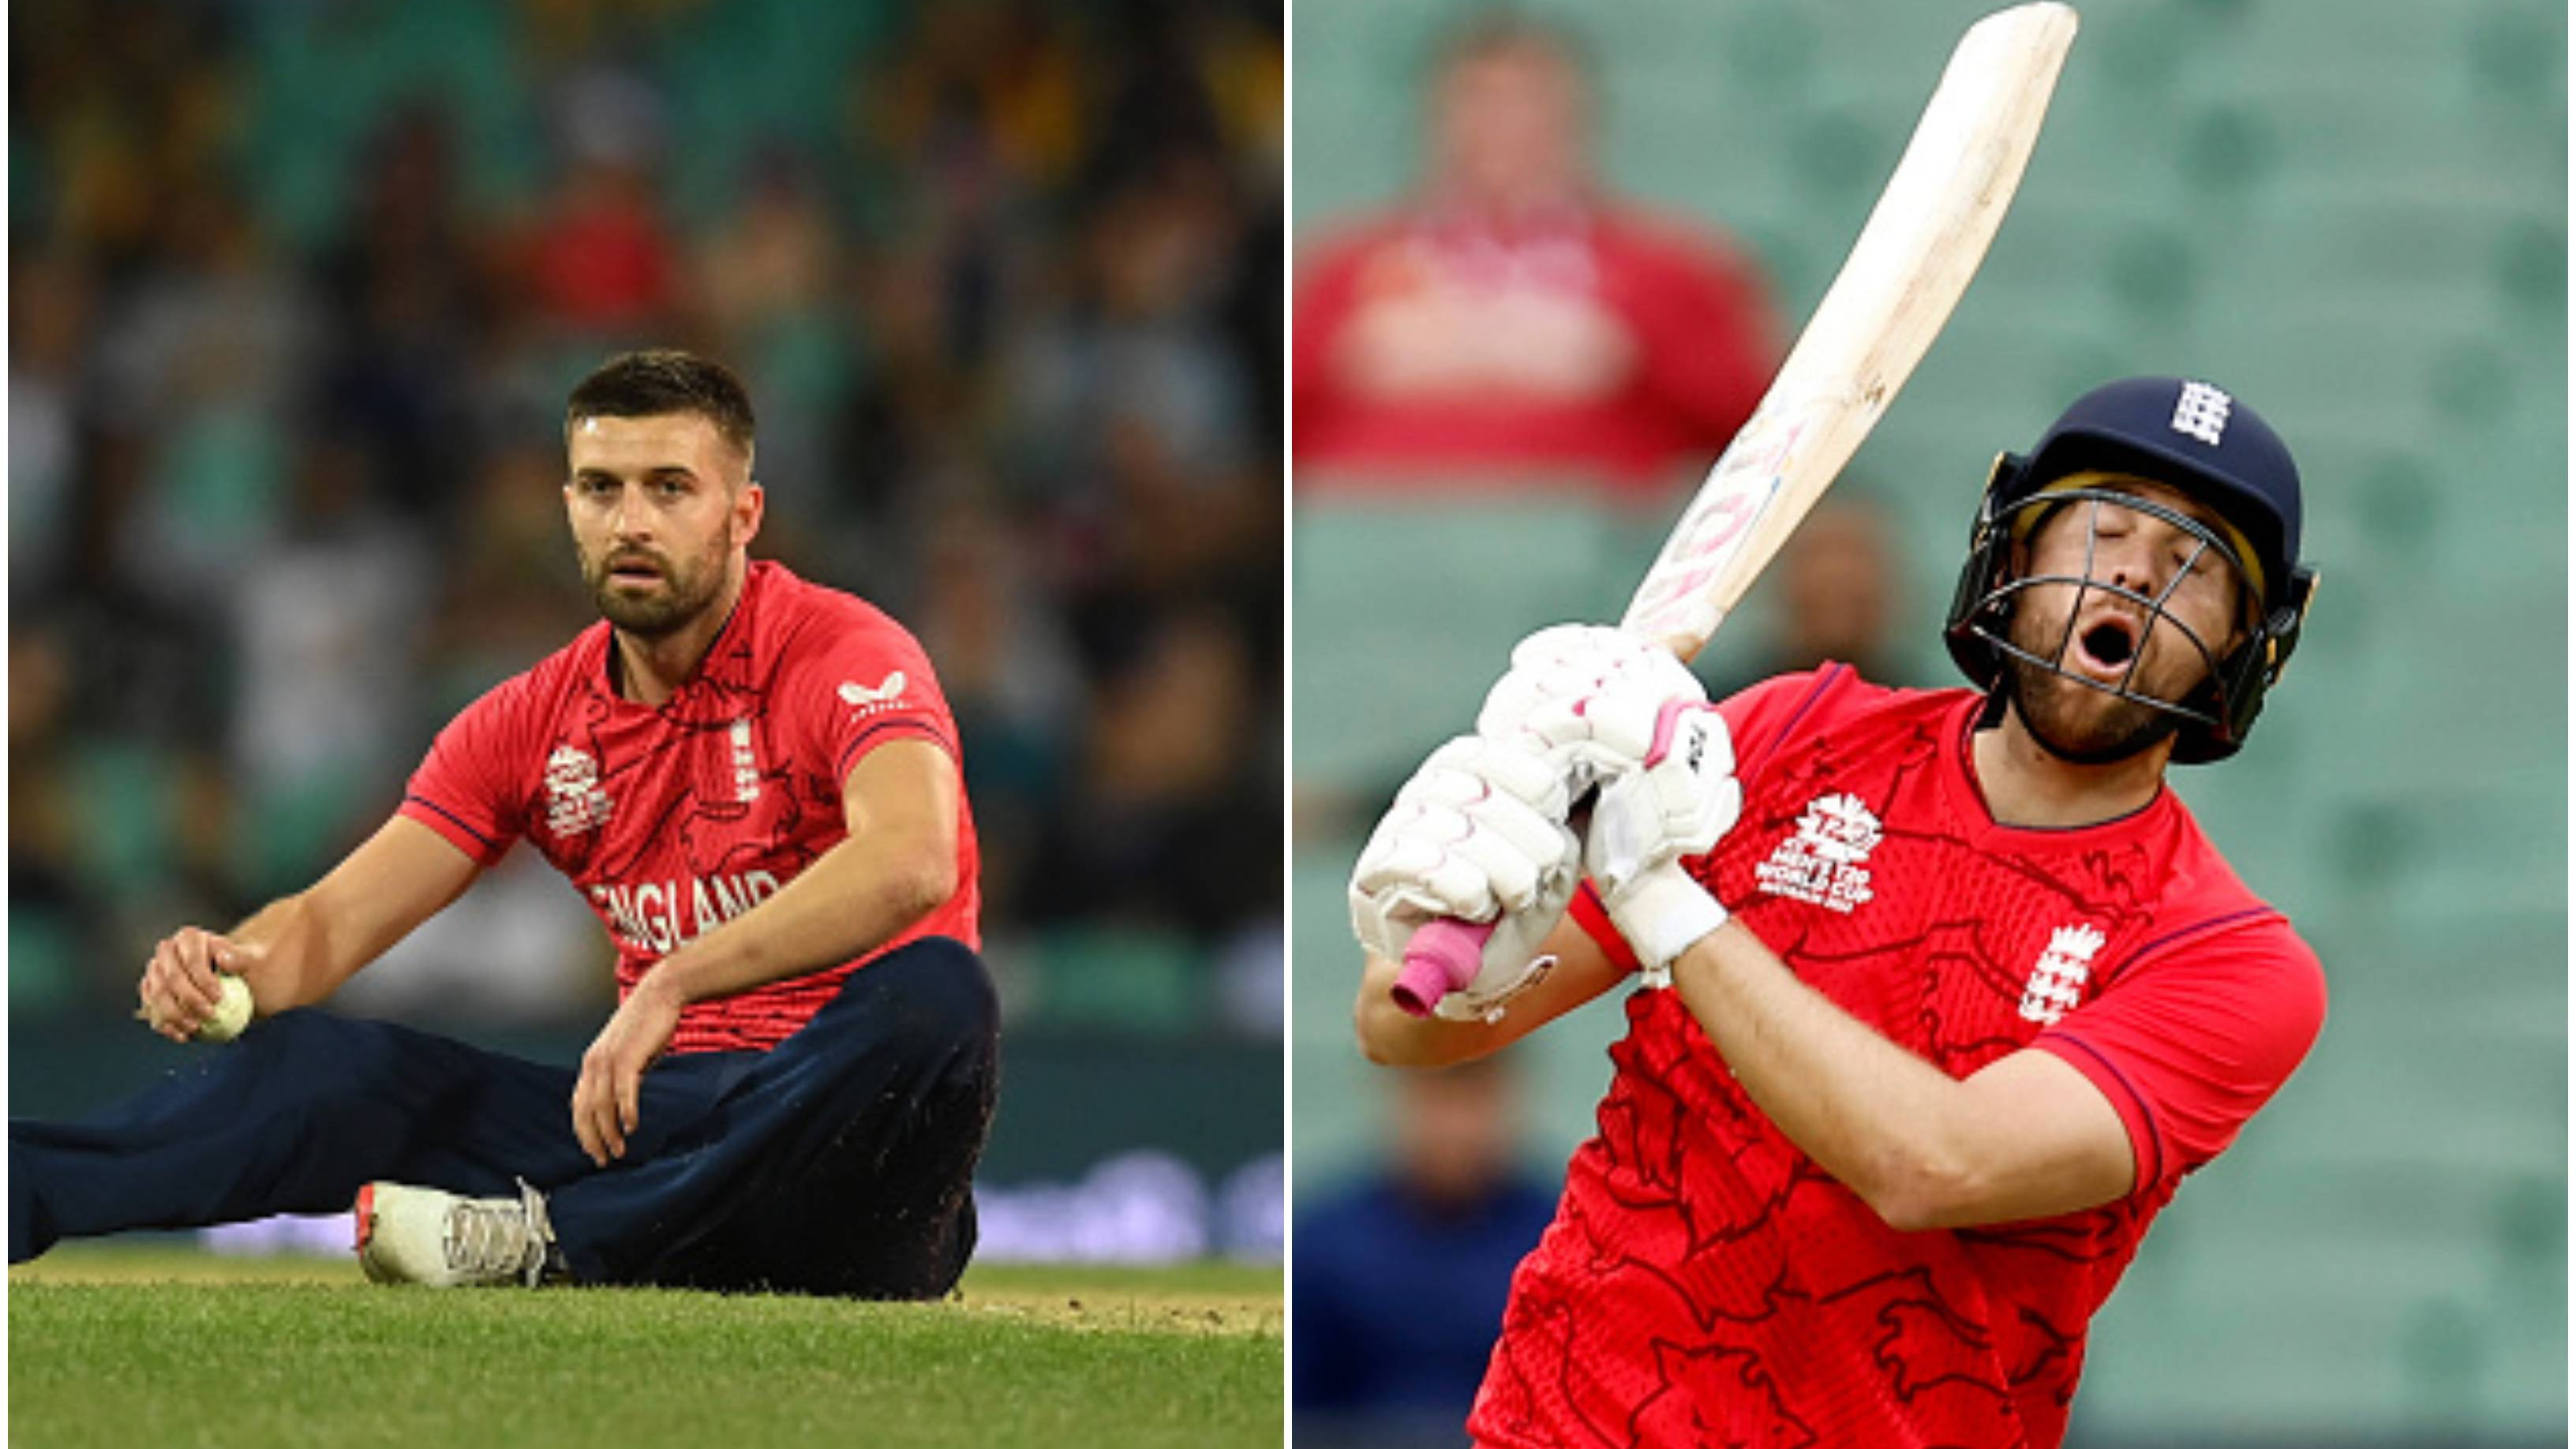 T20 World Cup 2022: Mark Wood, Dawid Malan face fitness issues ahead of semi-final clash against India